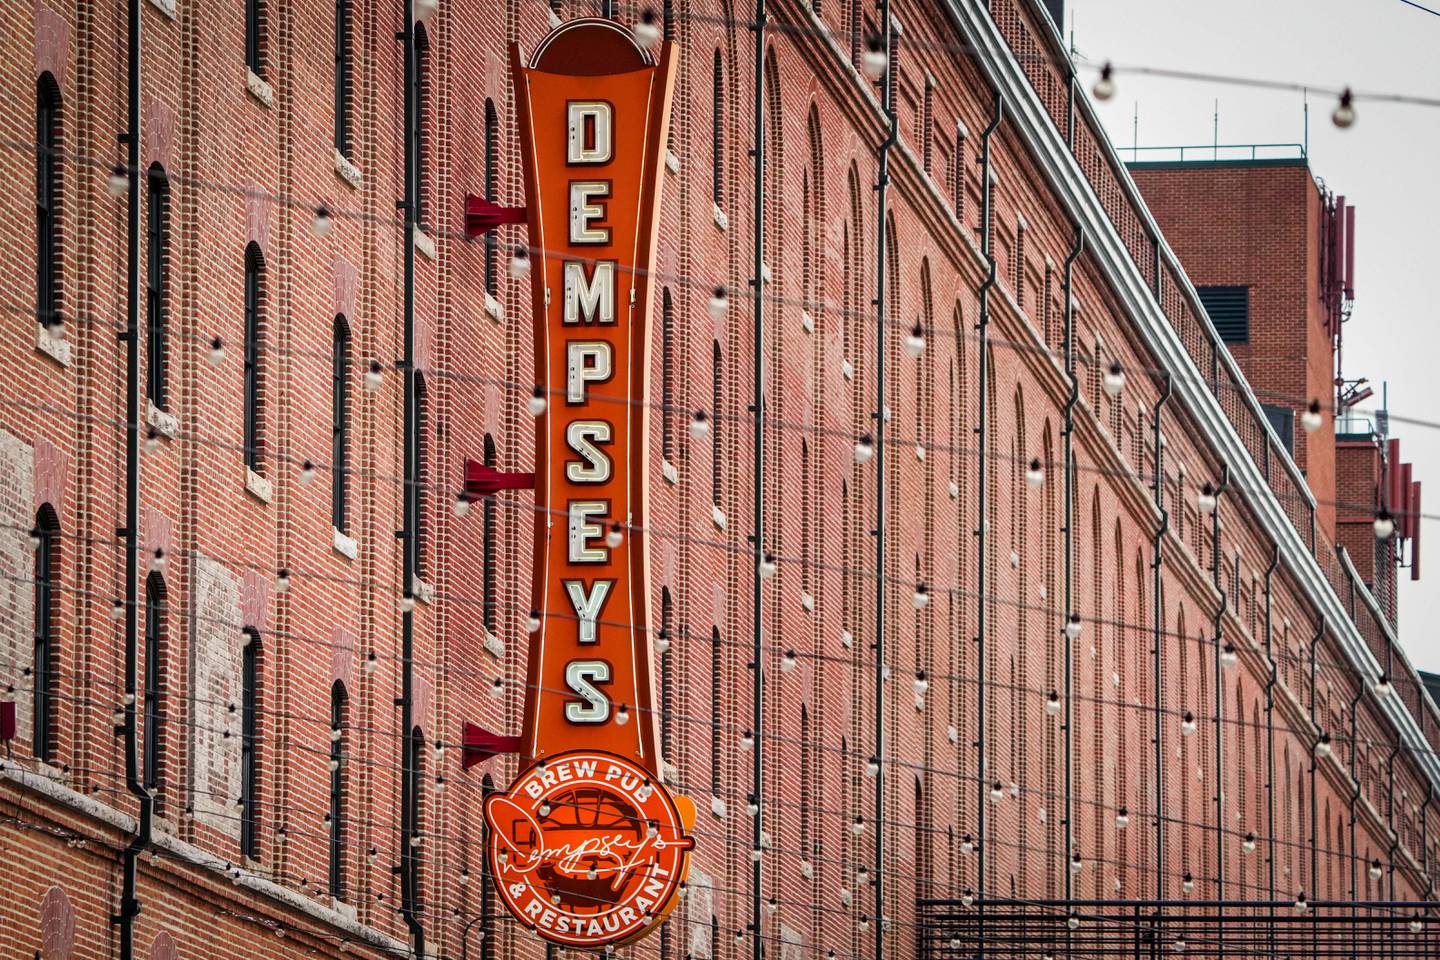 Exterior detail of Dempsey's inside Orioles Park at Camden Yards in Baltimore on 2/2/23.